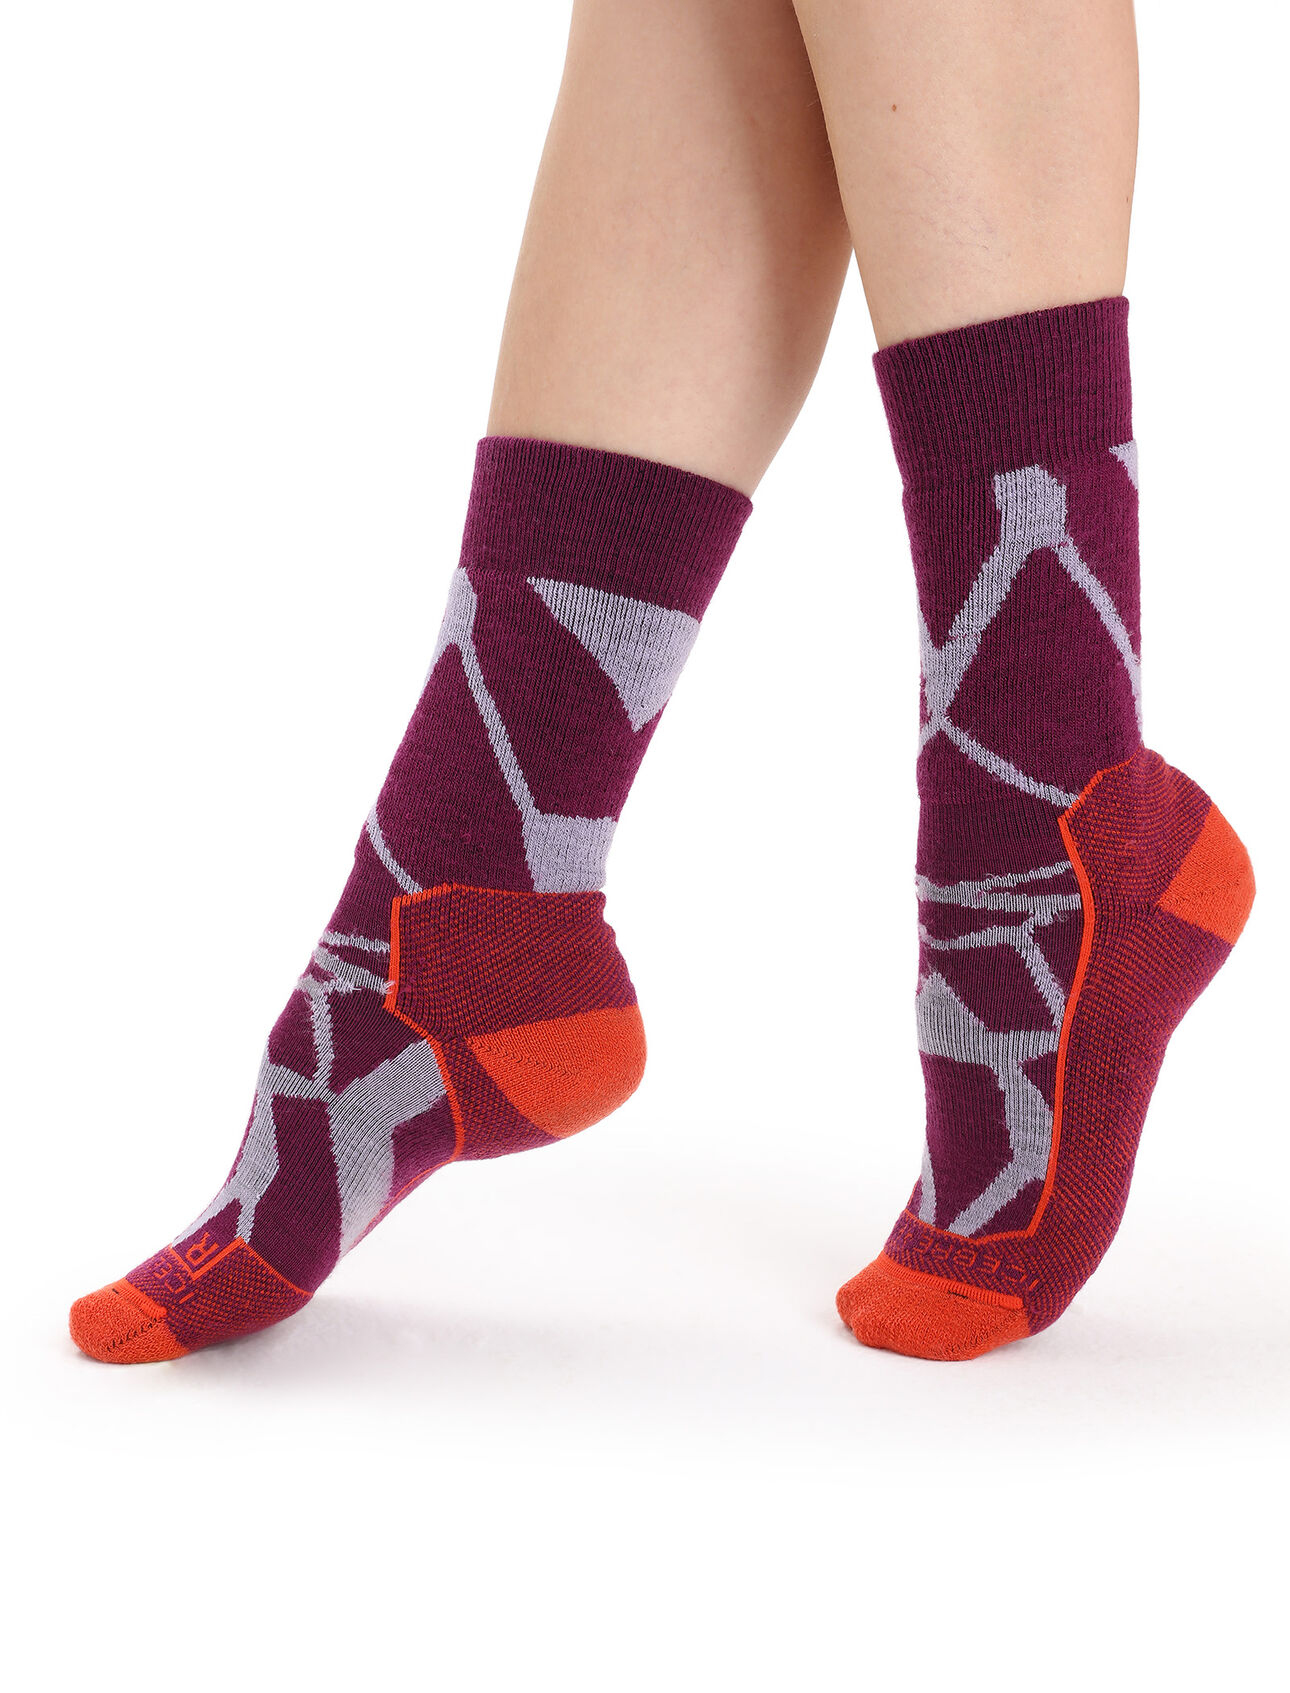 Womens Merino Hike+ Medium Crew Fractured Landscapes Socks Durable, crew-length merino socks that are stretchy and naturally odor-resistant with medium cushion, the Hike+ Medium Crew Fractured Landscapes socks feature an anatomical sculpted design for added support on day hikes and backpacking  trips.